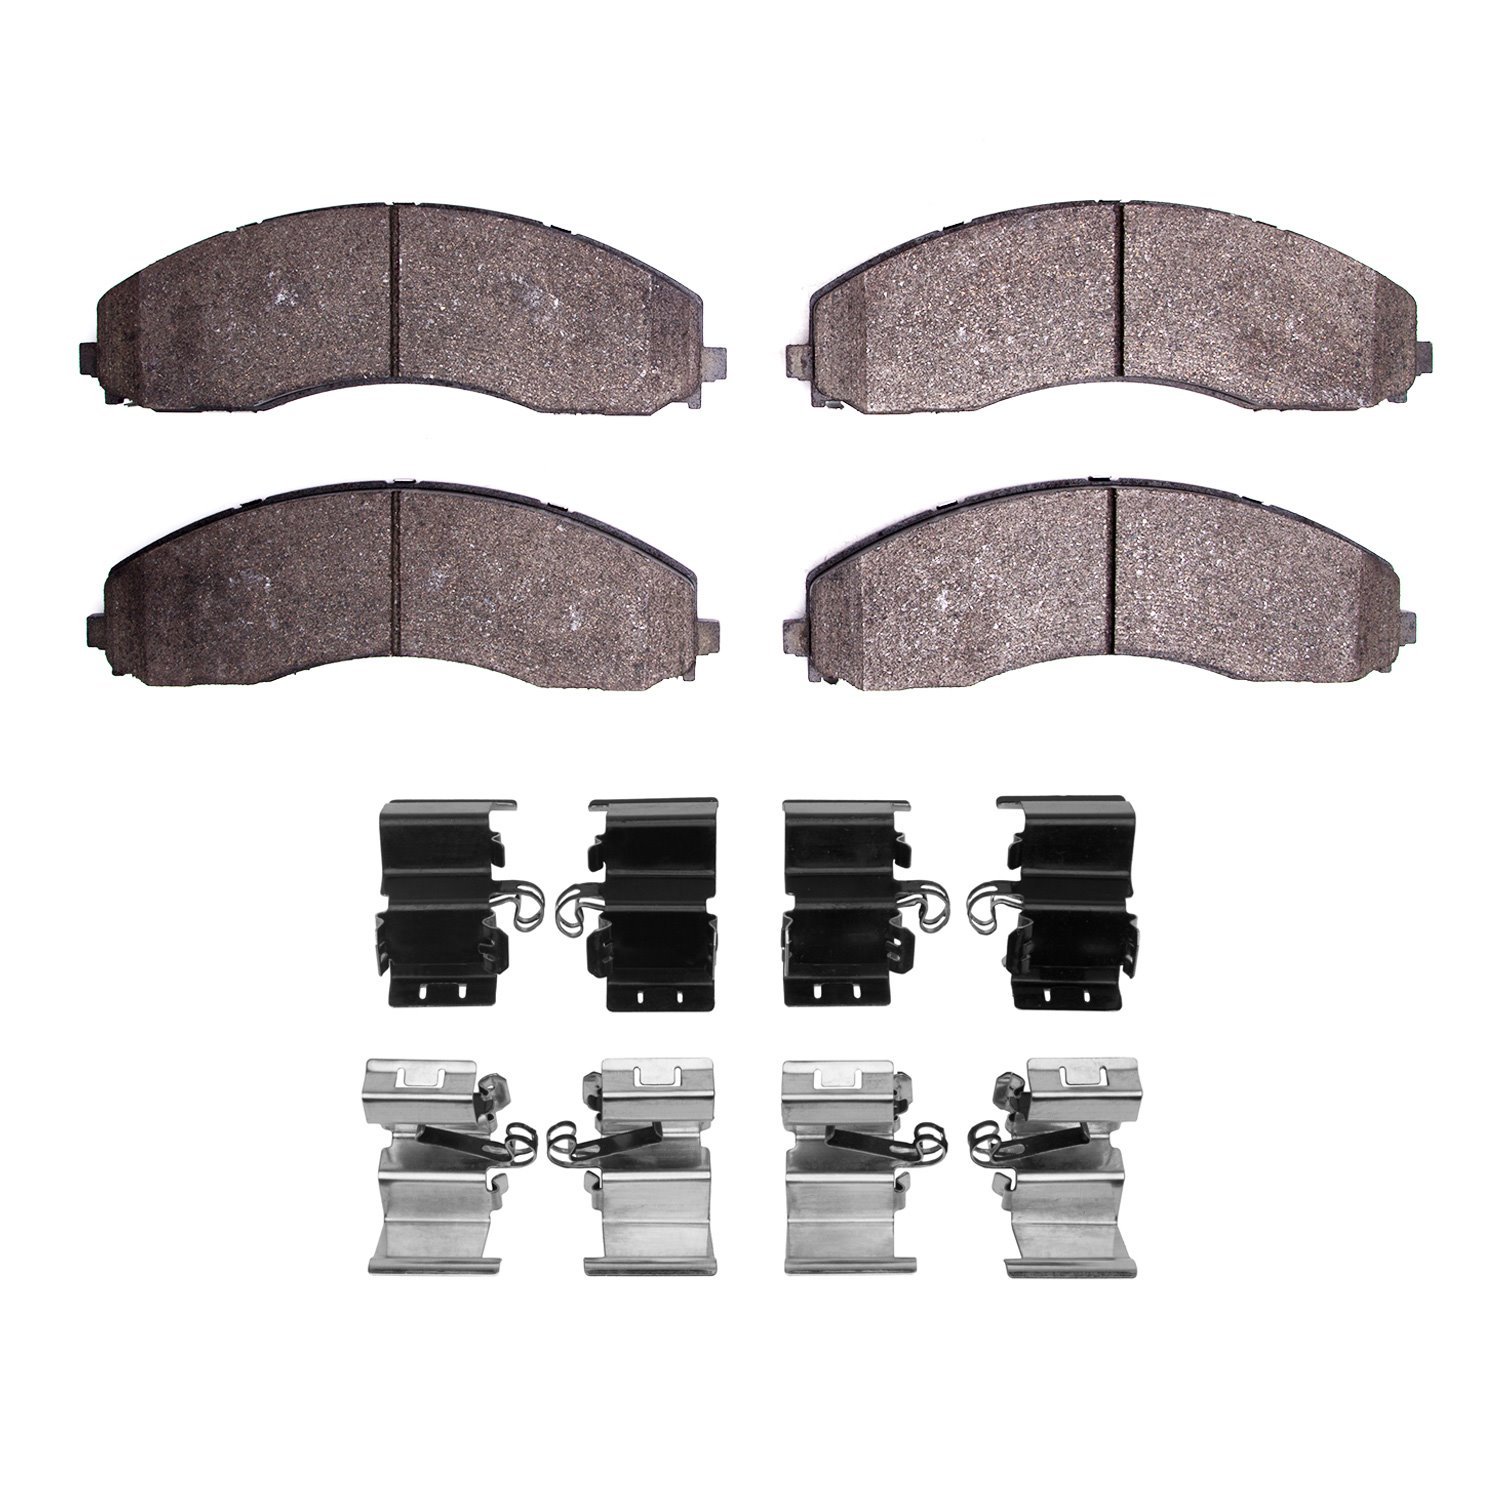 1214-2018-01 Heavy-Duty Brake Pads & Hardware Kit, Fits Select Ford/Lincoln/Mercury/Mazda, Position: Fr,Fr & Rr,Front,Rear,Rr